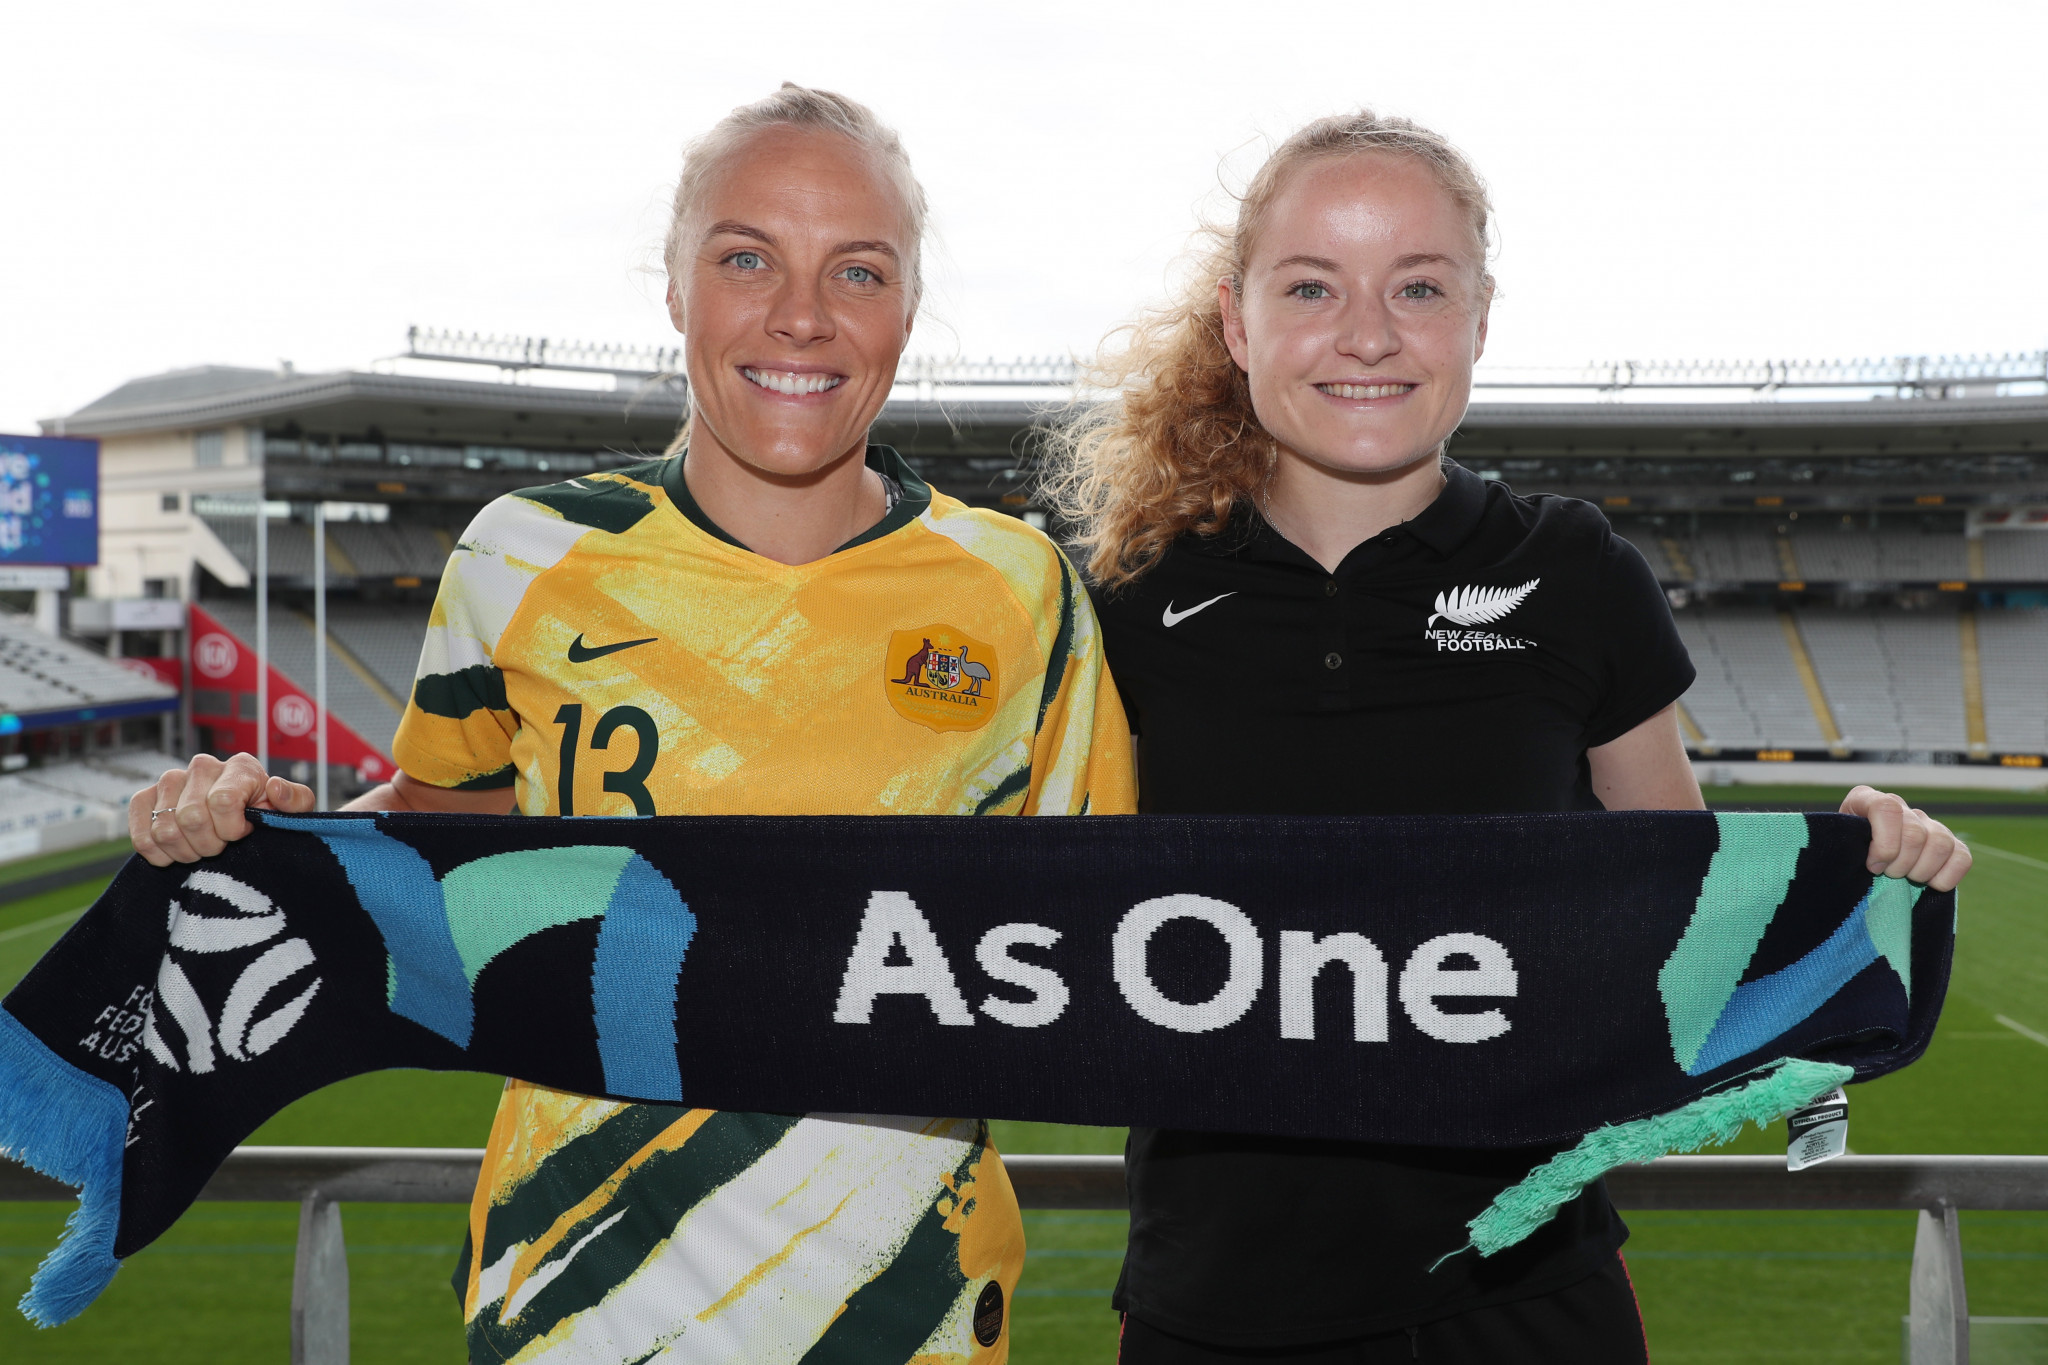 Australia and New Zealand are co-hosts of the 2023 FIFA Women’s World Cup, so have already qualified ©Getty Images